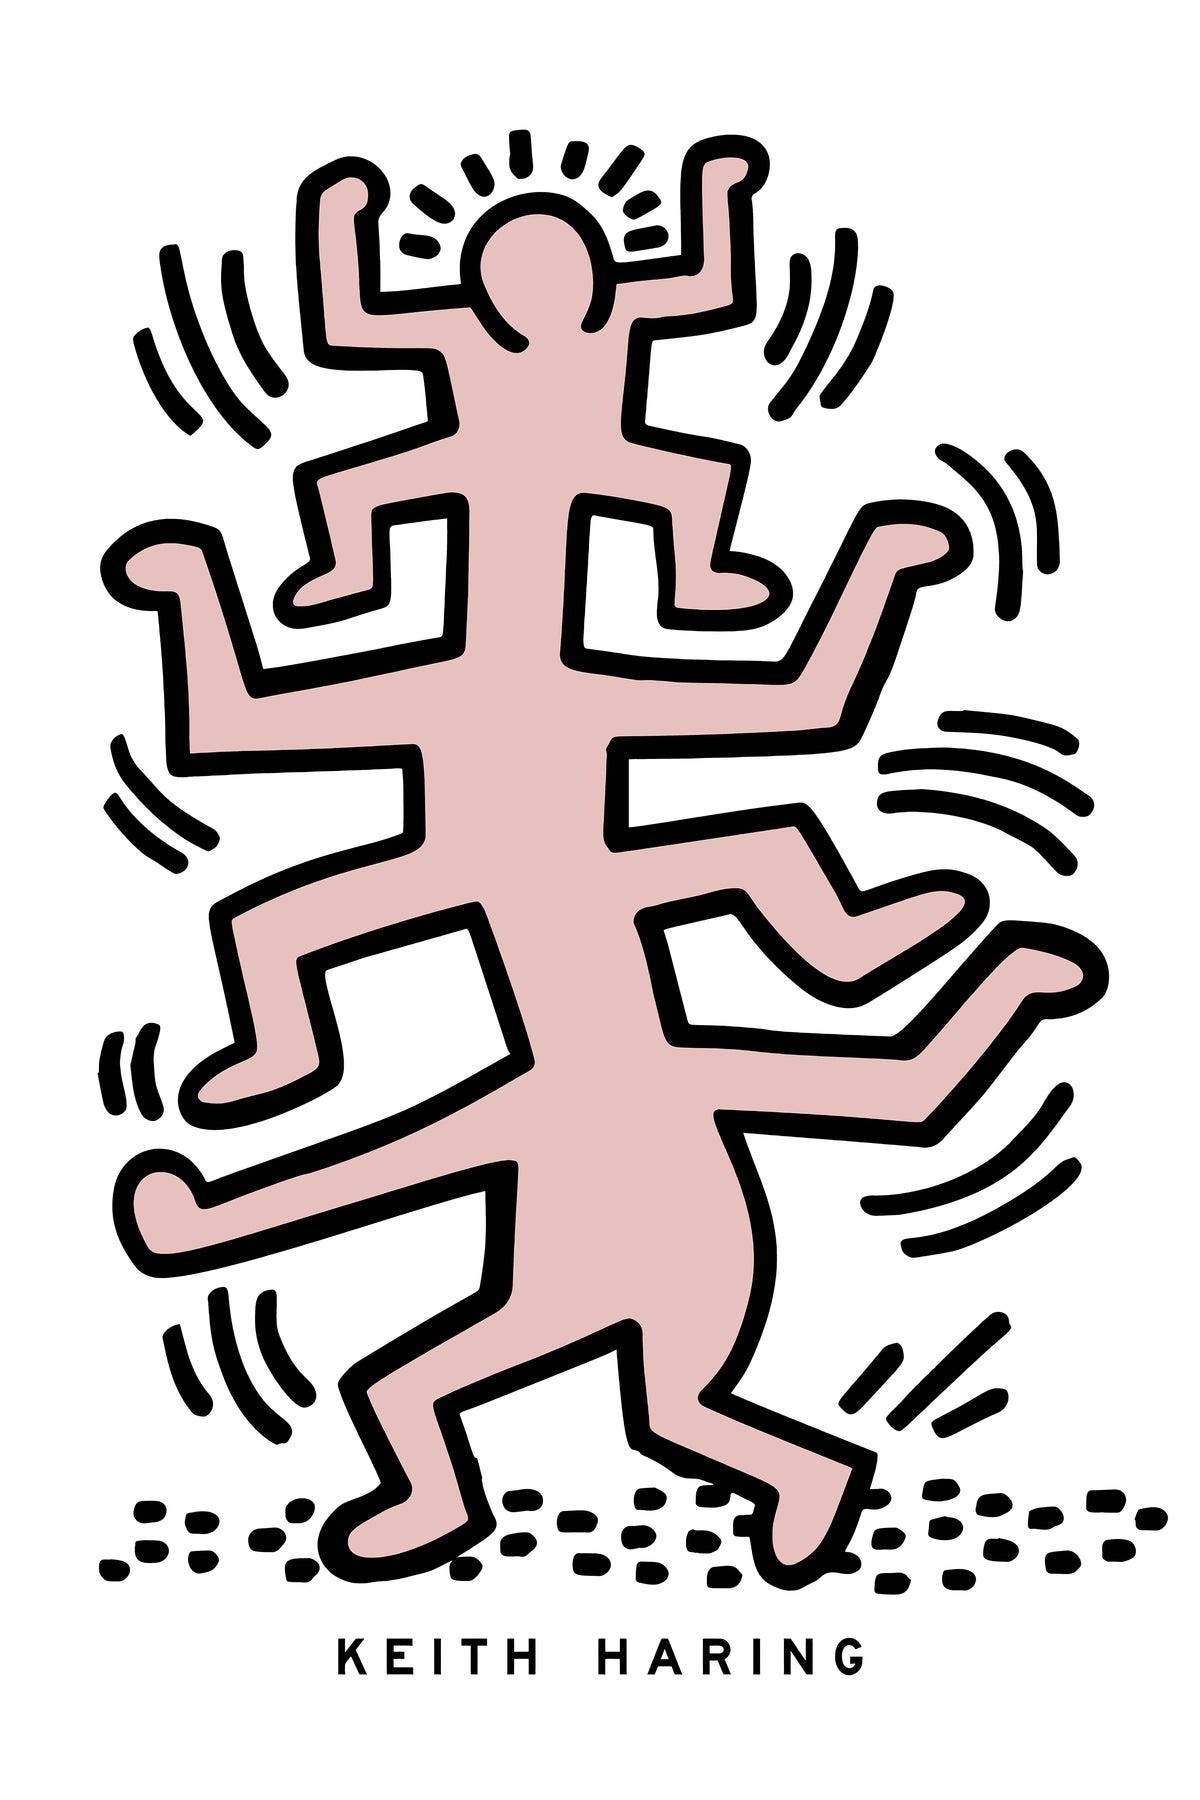 Keith Haring Exhibition Poster